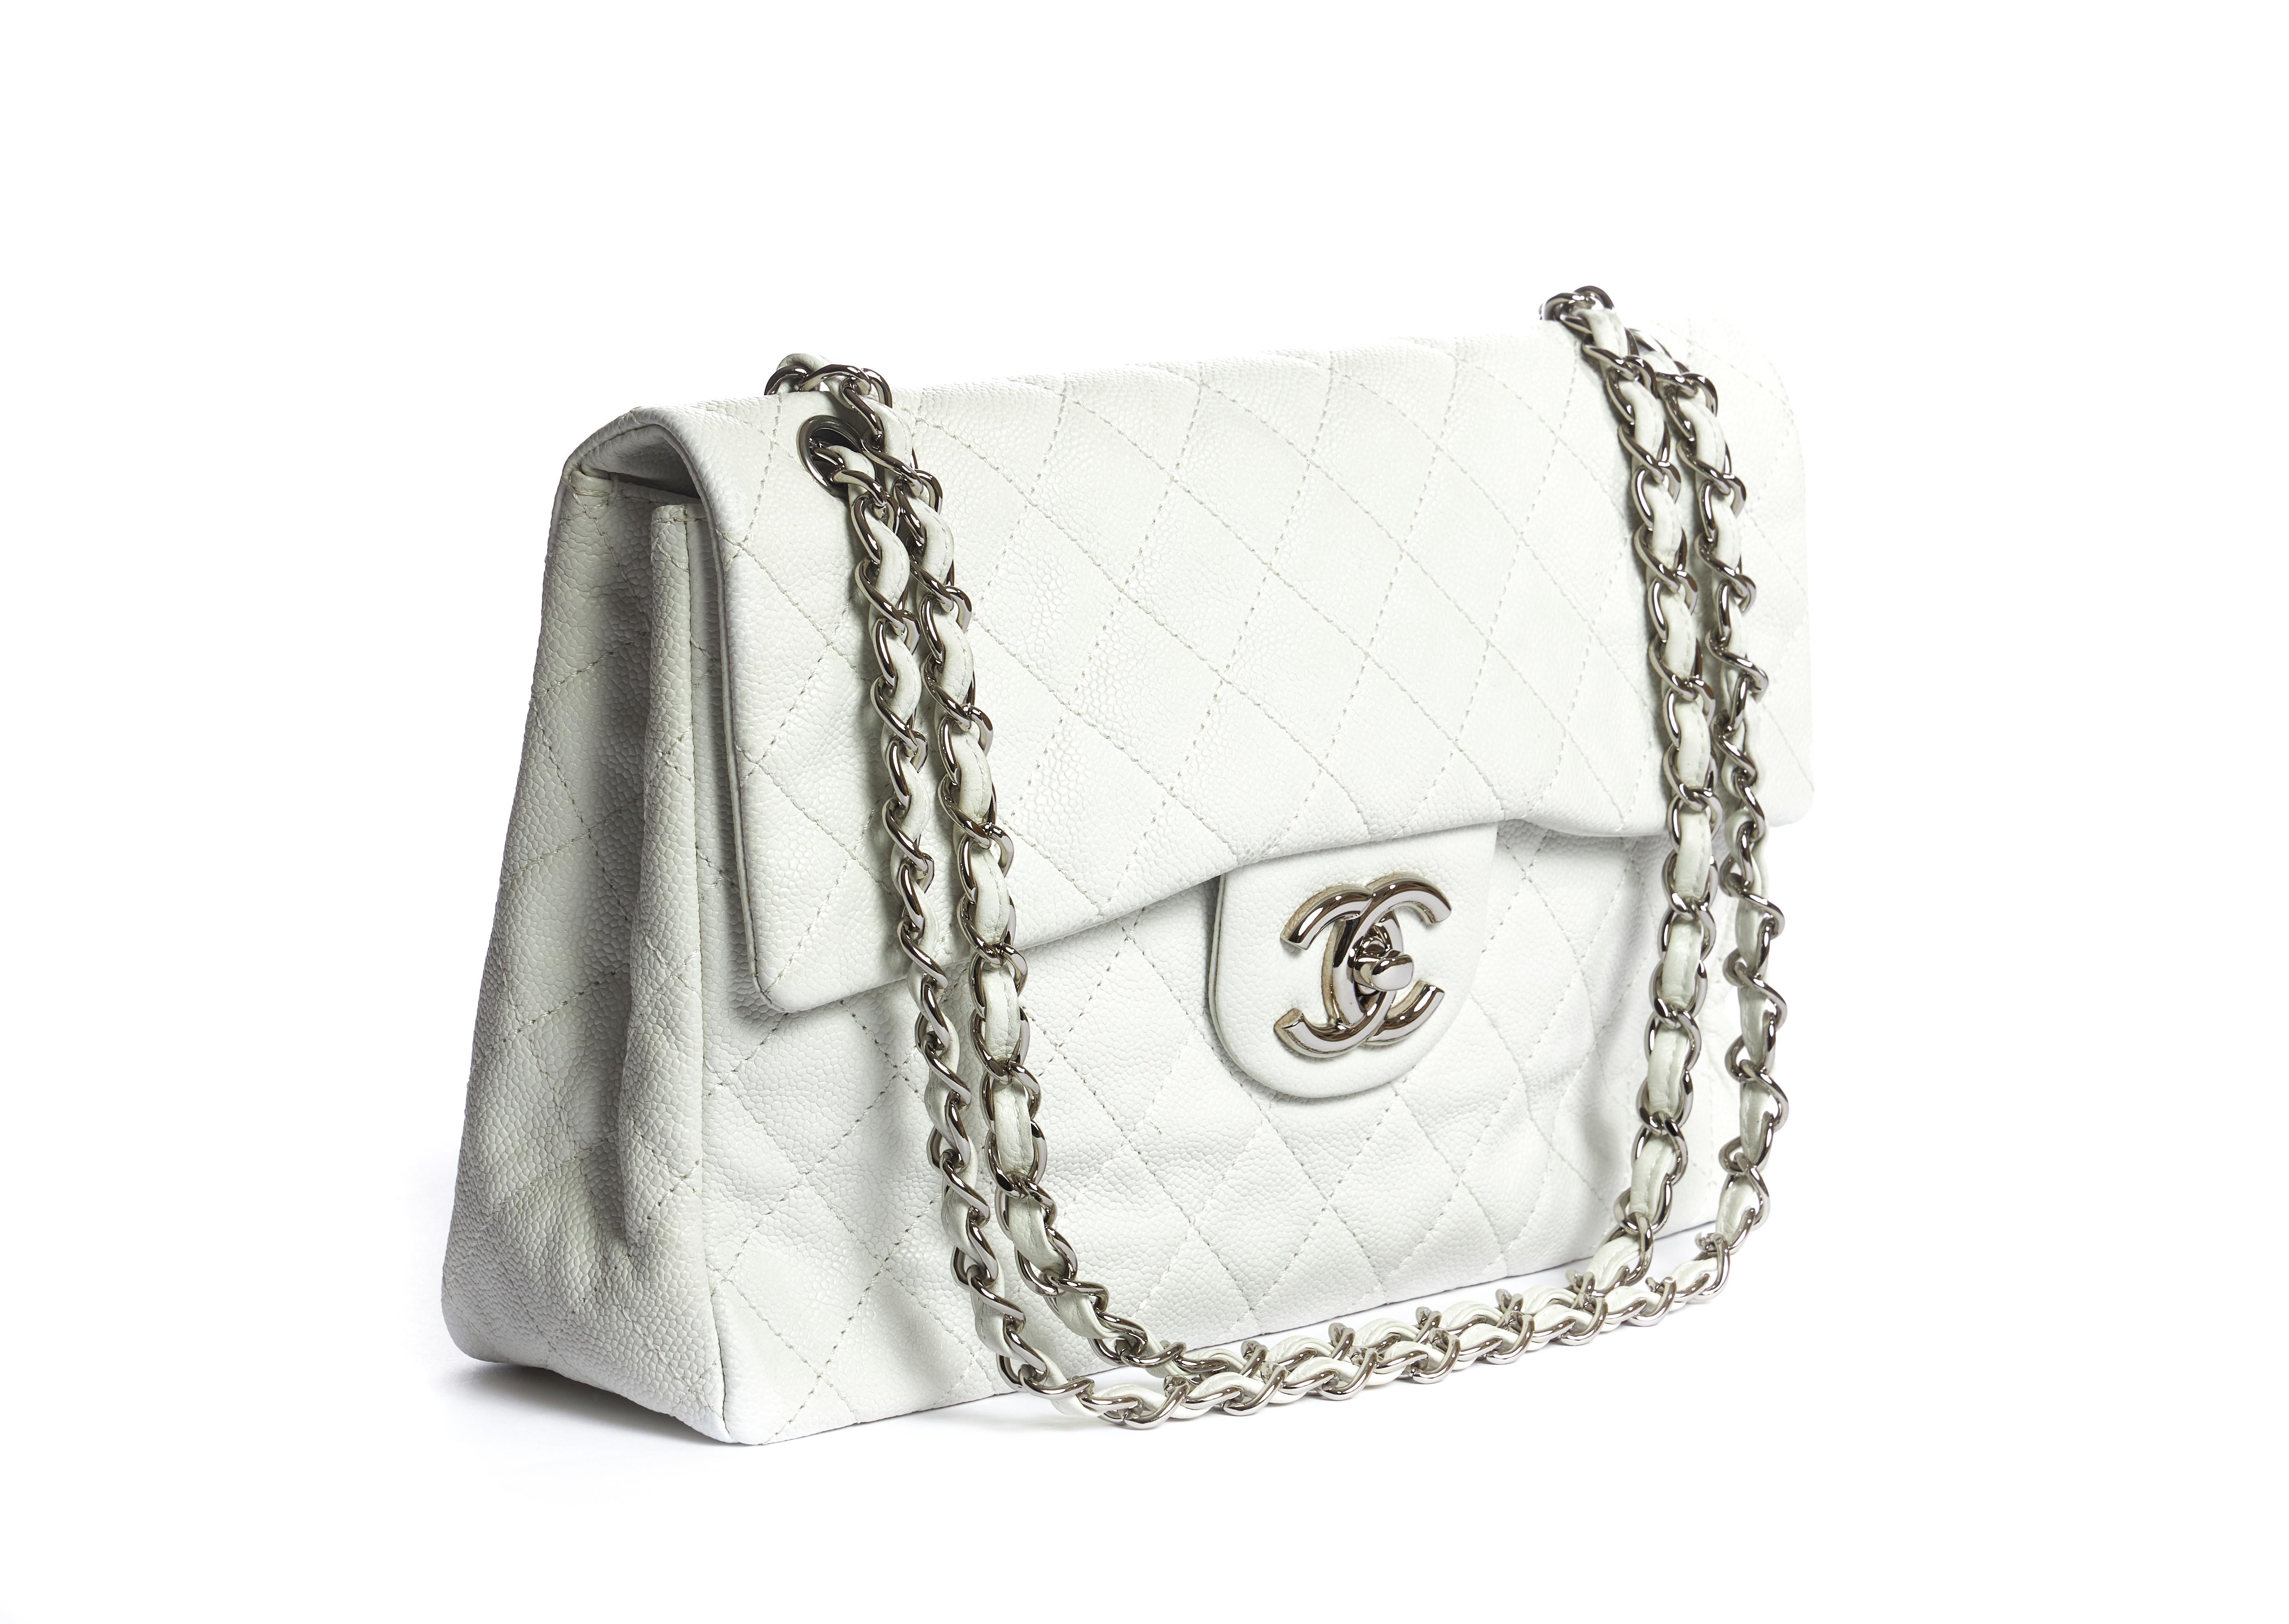 Chanel white caviar maxi single flap with silver tone hardware. Shoulder drop 12